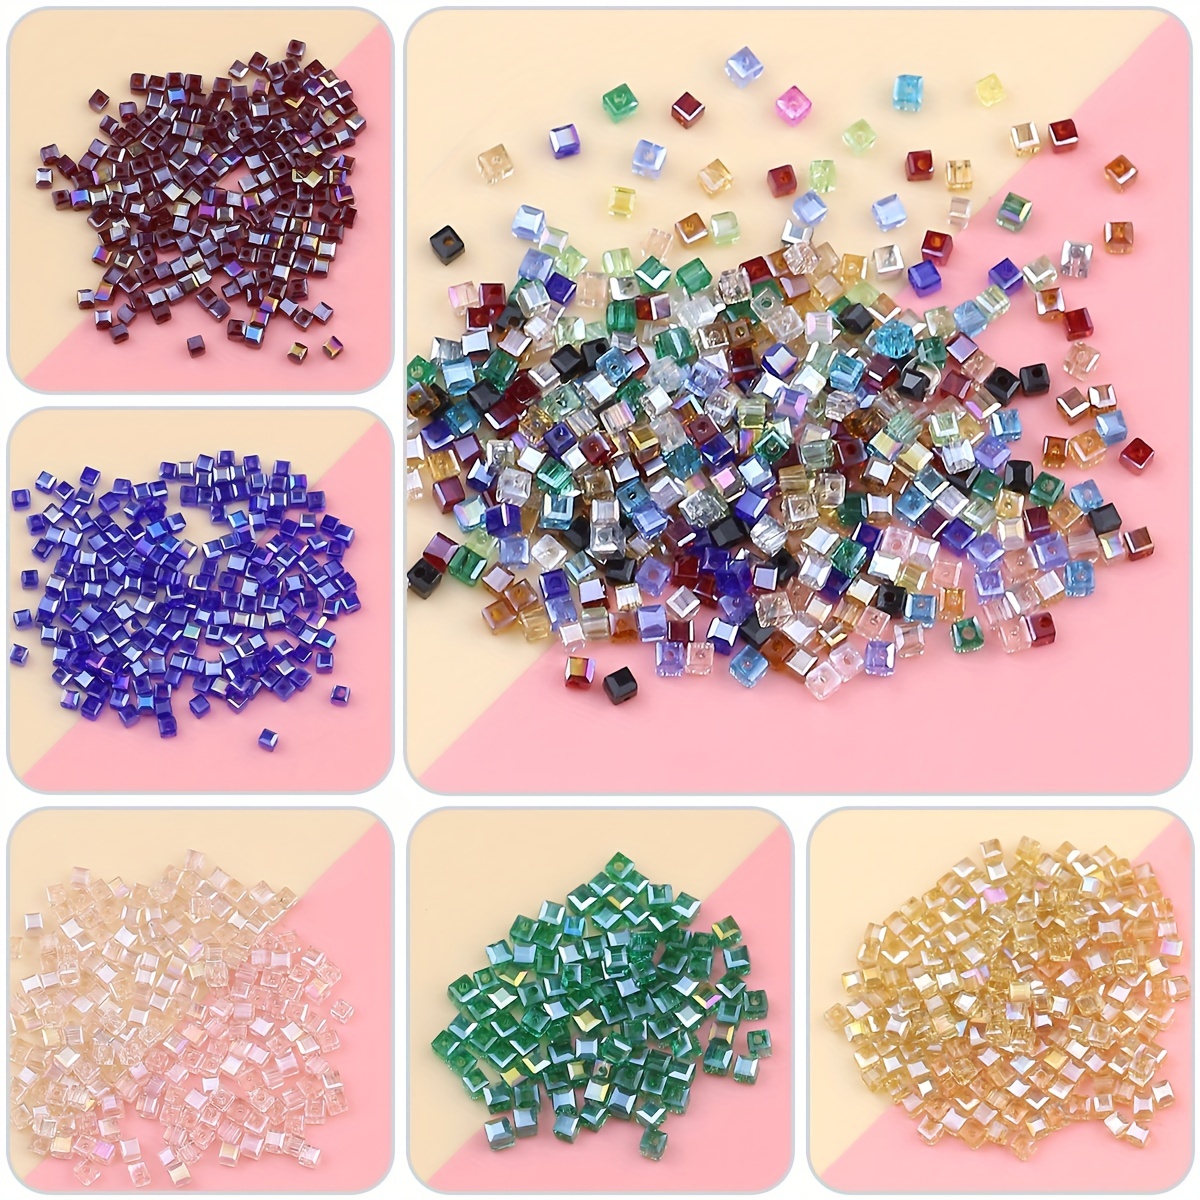 15 Colors 750Pcs/Box Faceted Glass Crystal Beads Bulk-6MM Round Ball Glass  Beads Loose Beading for DIY Jewelry Beads Accessories